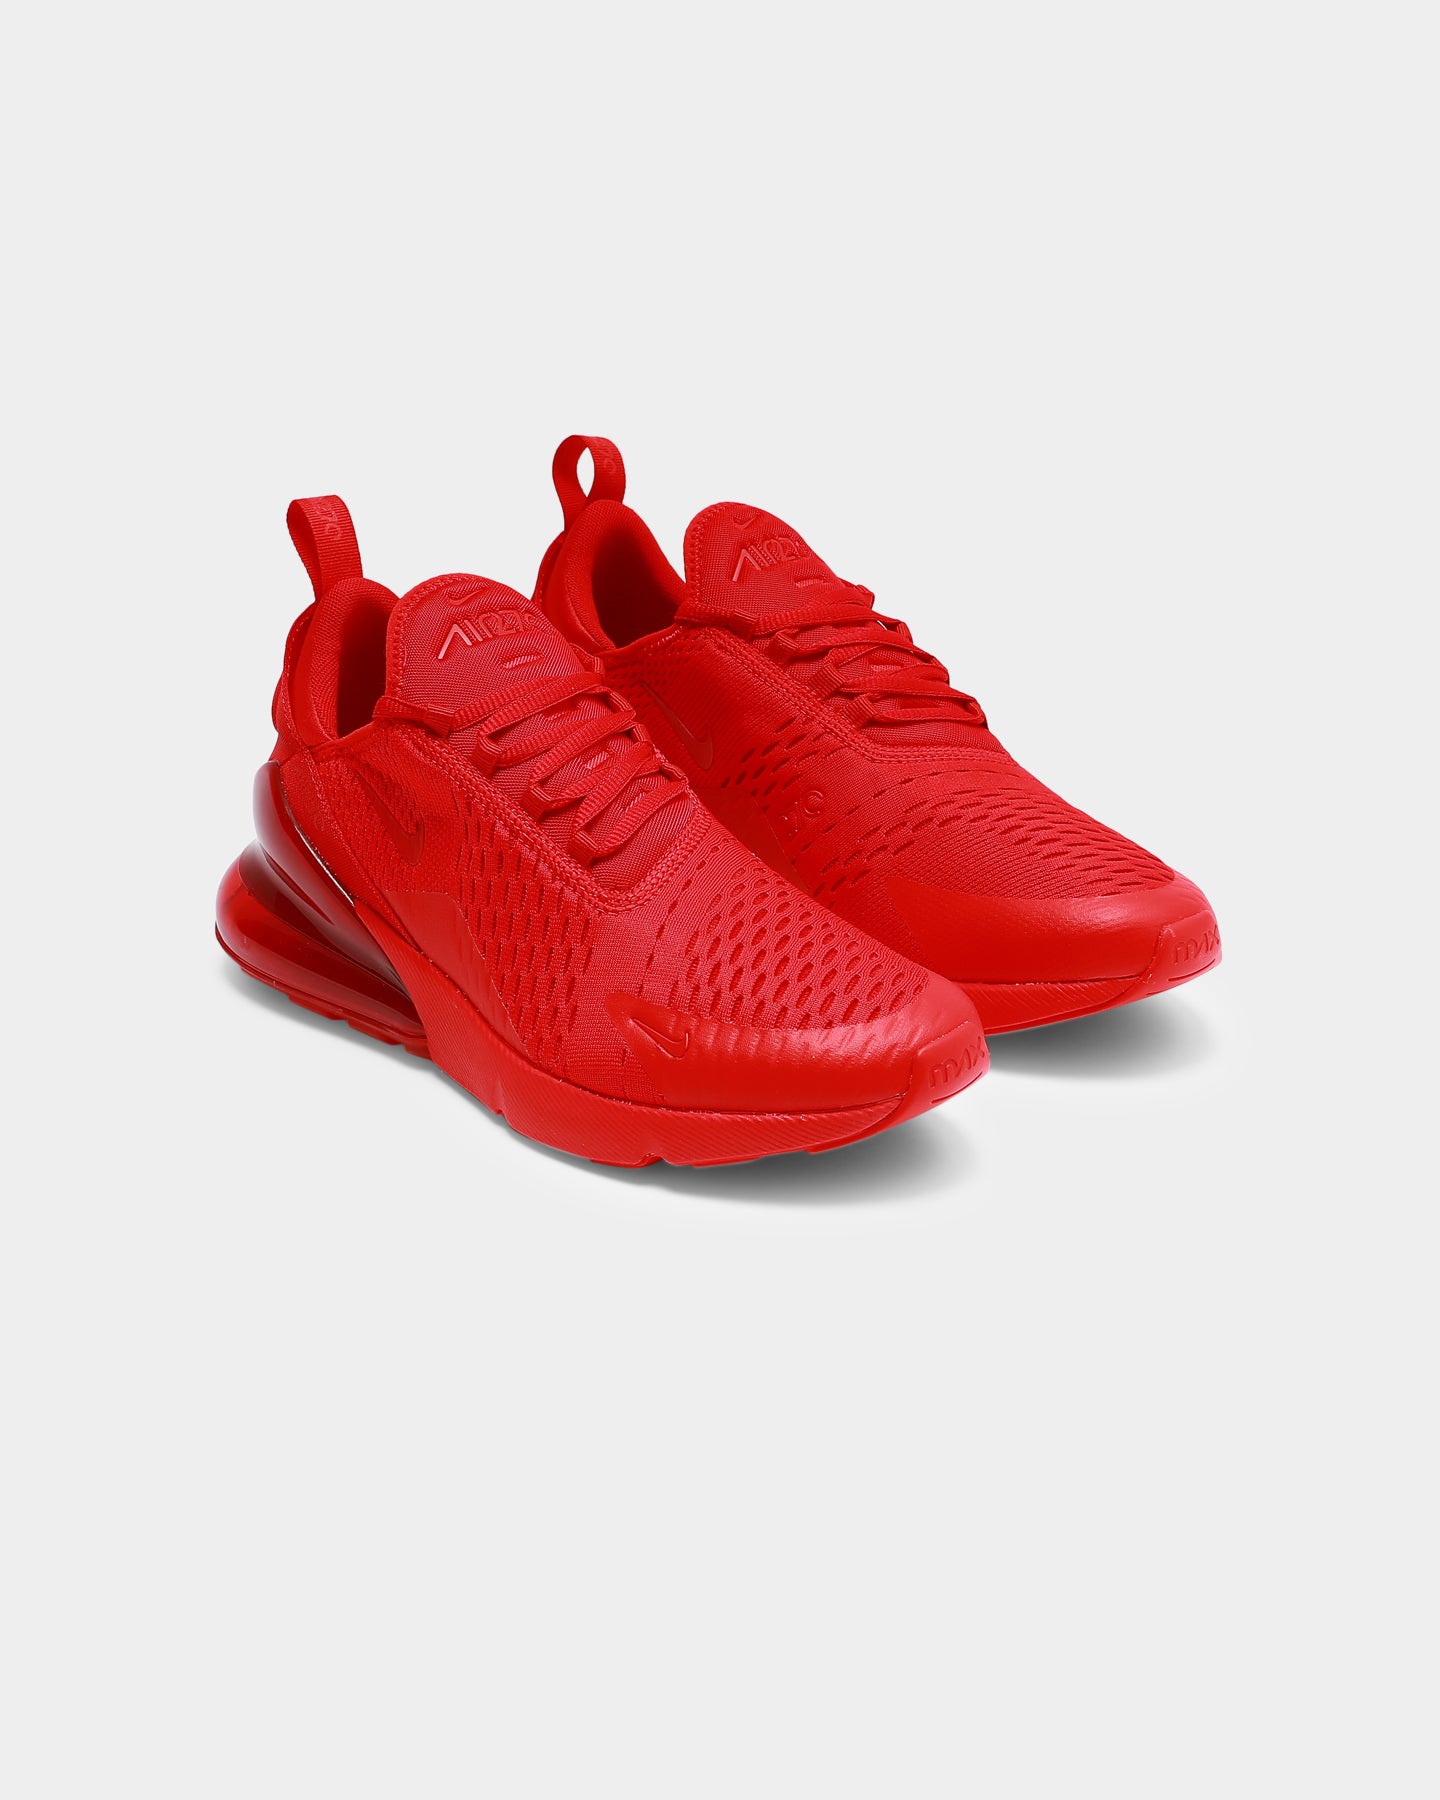 air max 270 in red